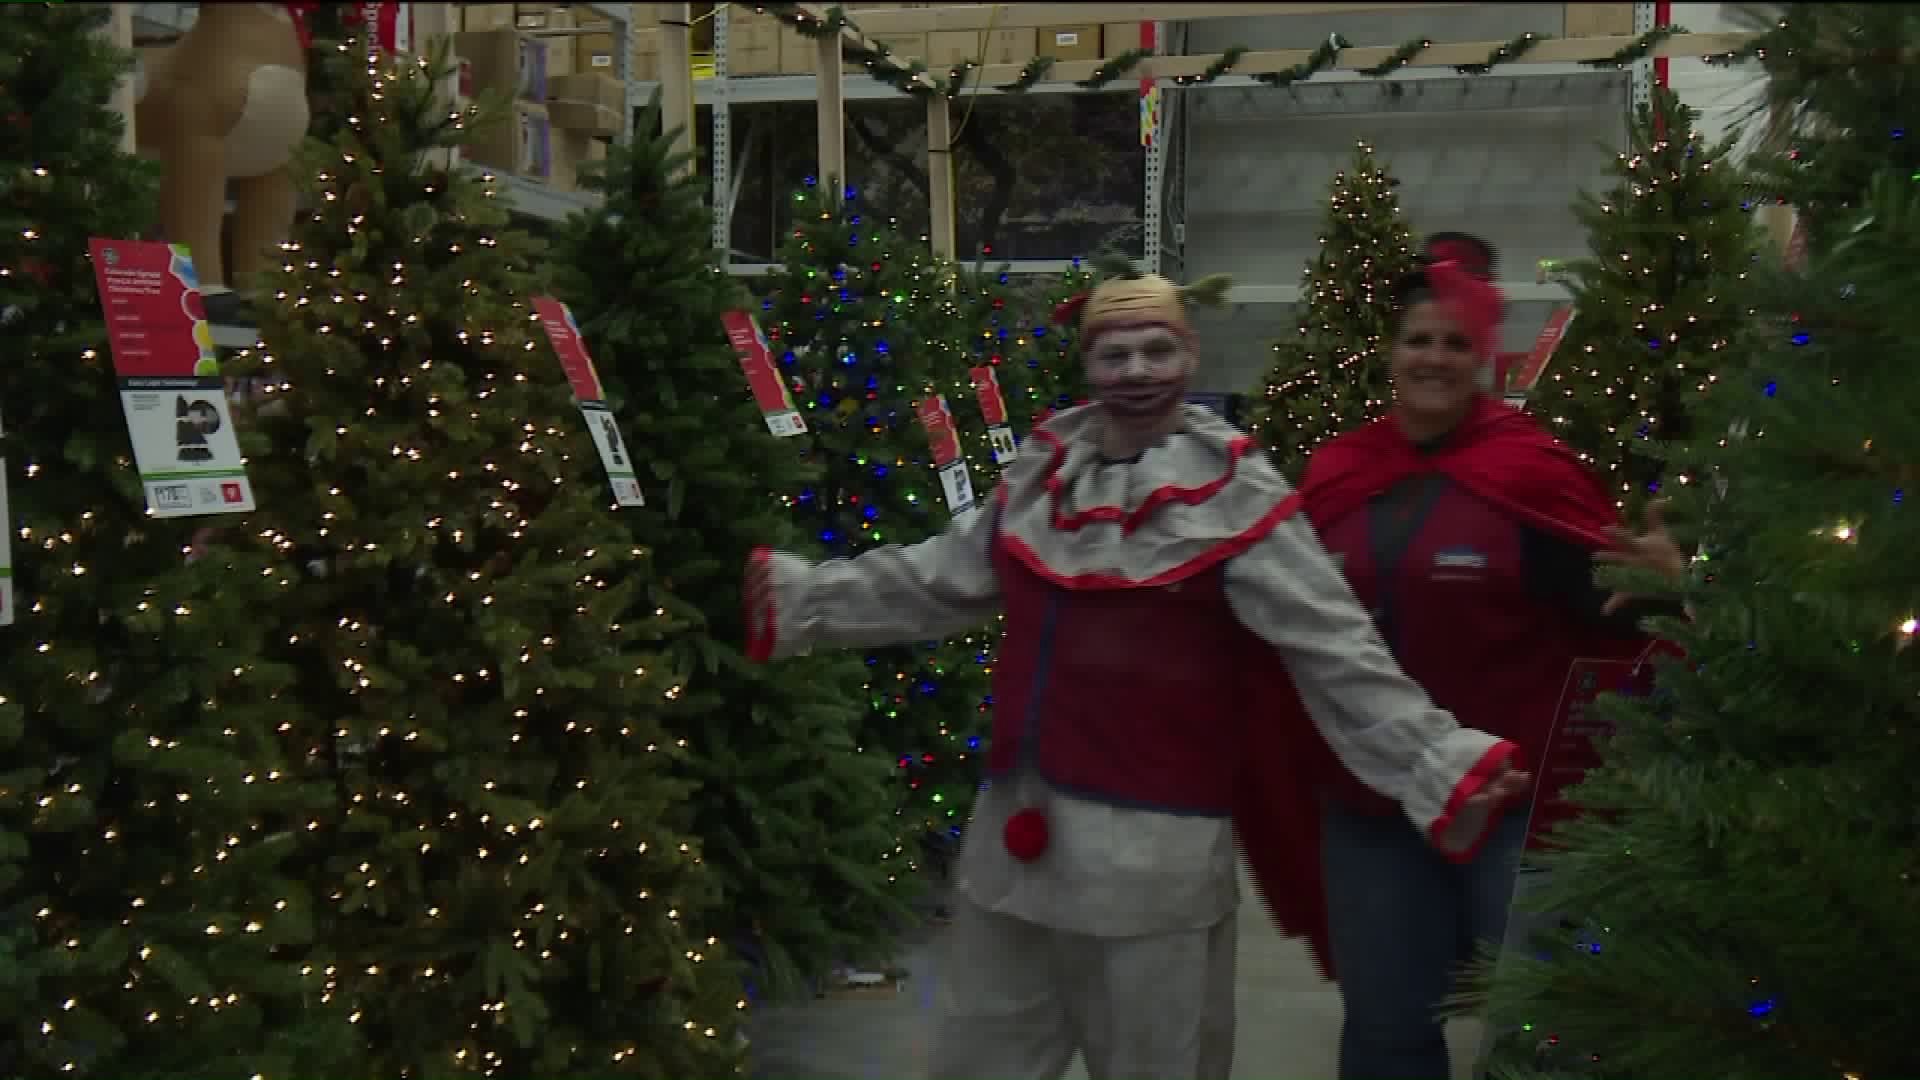 Even During Halloween, Christmas Takes Center Stage at Stores